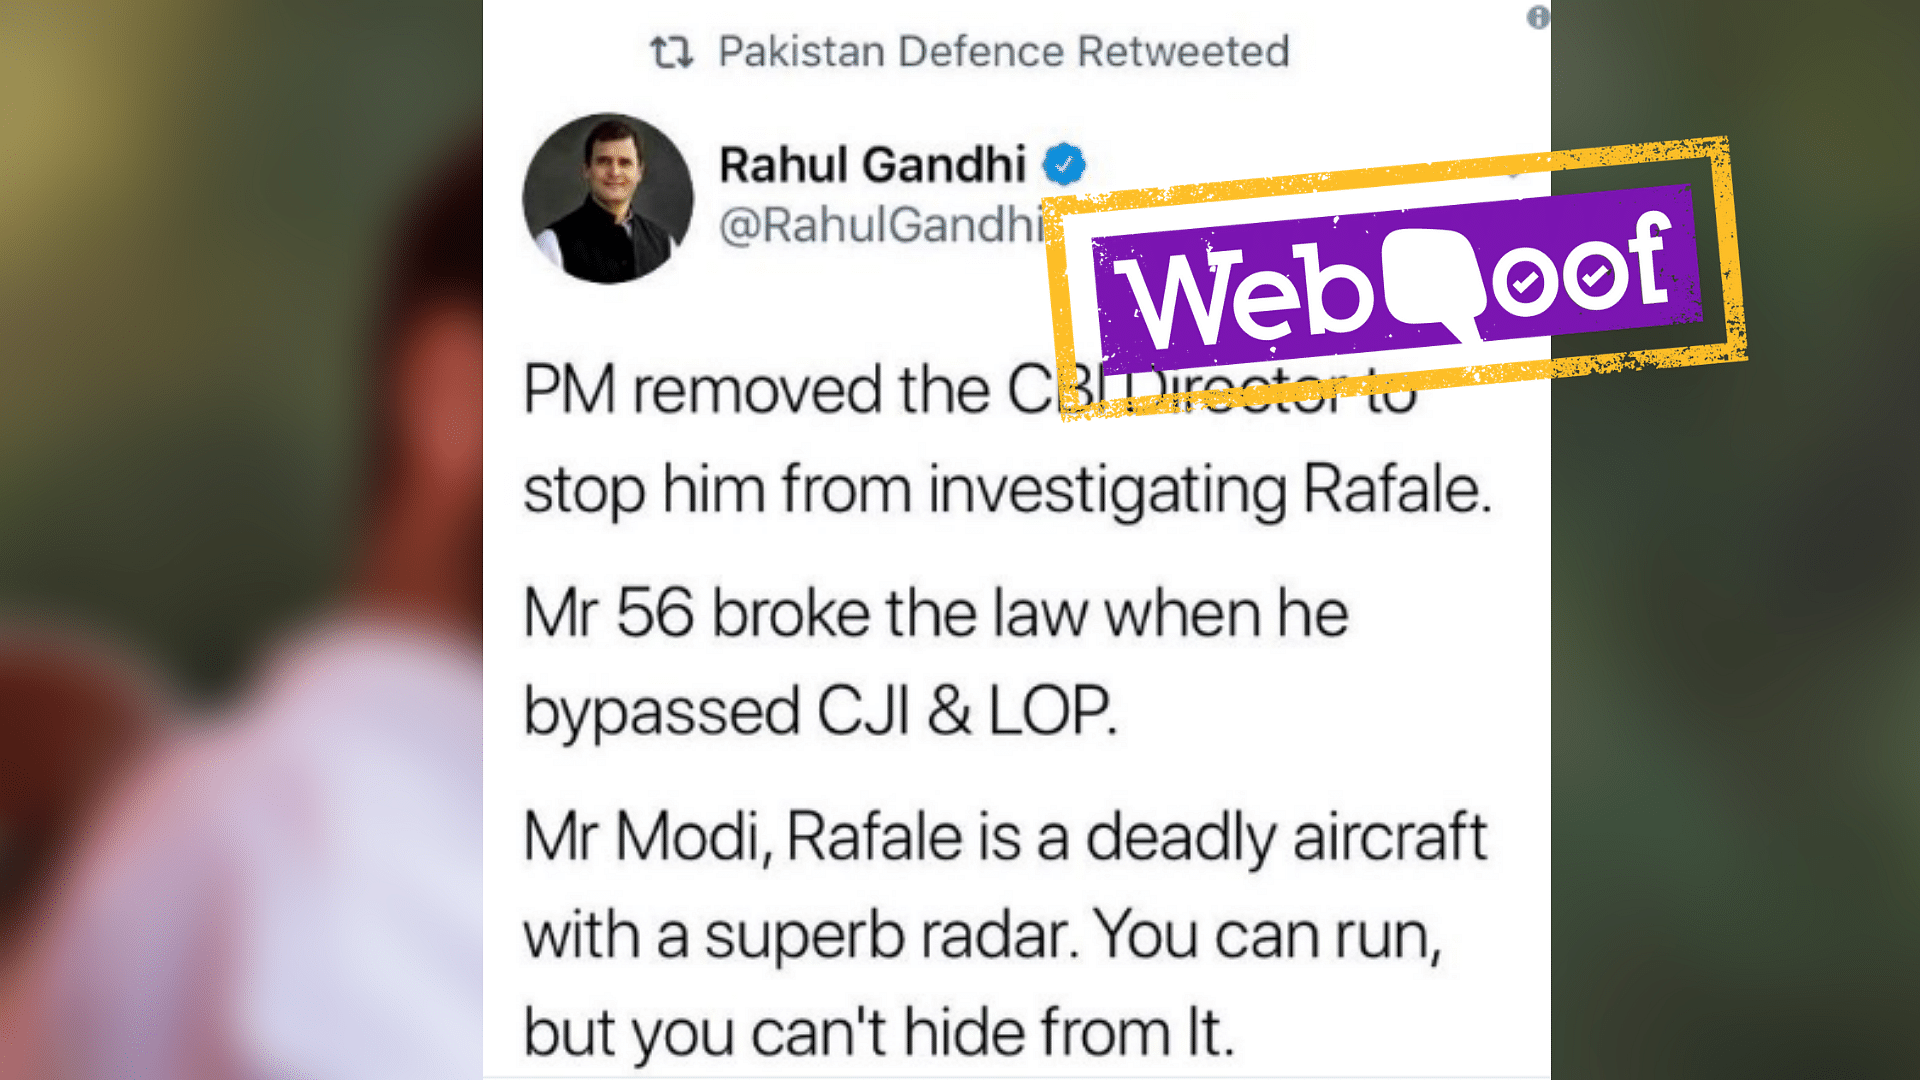 The post was in fact retweeted by an online forum that discusses Pakistani defence issues.&nbsp;